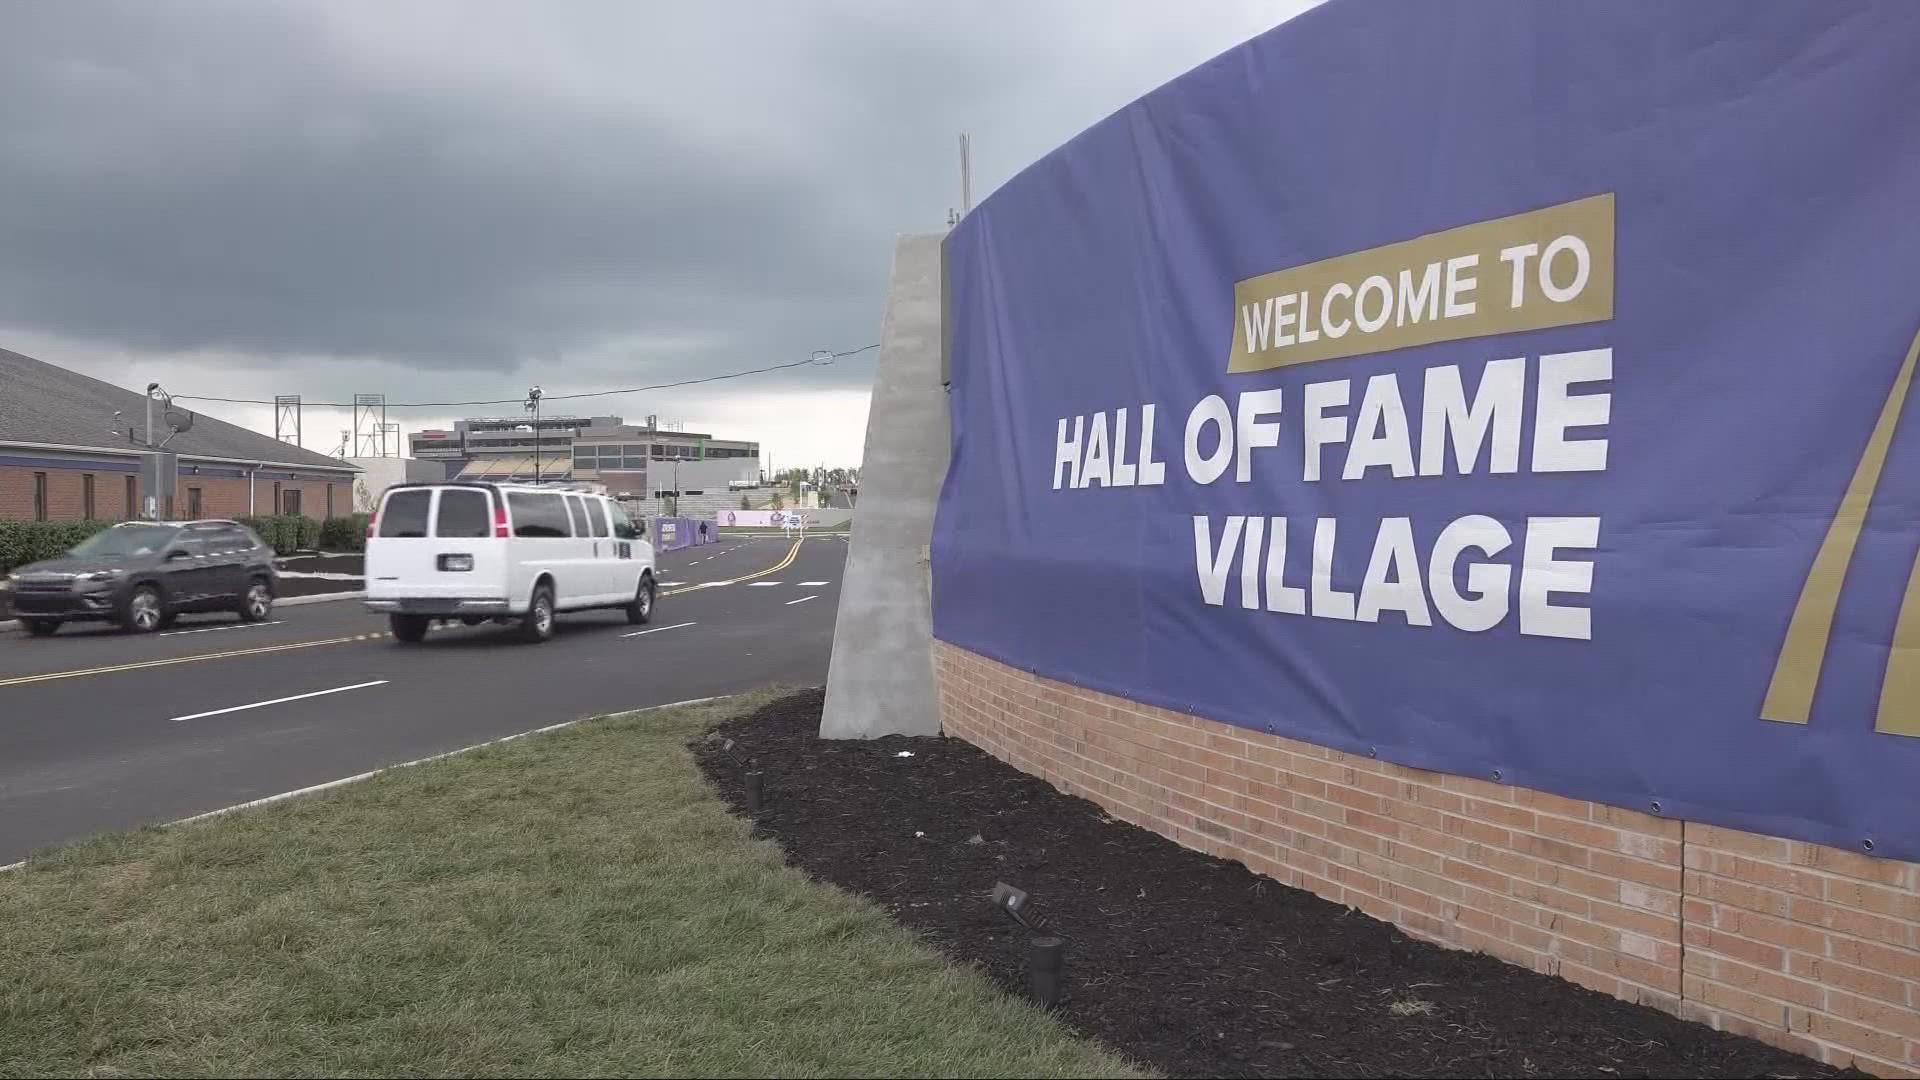 Visitors at the Pro Football Hall of Fame this weekend as NFL preseason kicks off will see plenty of new changes around Canton. 3News' Brandon Simmons reports.